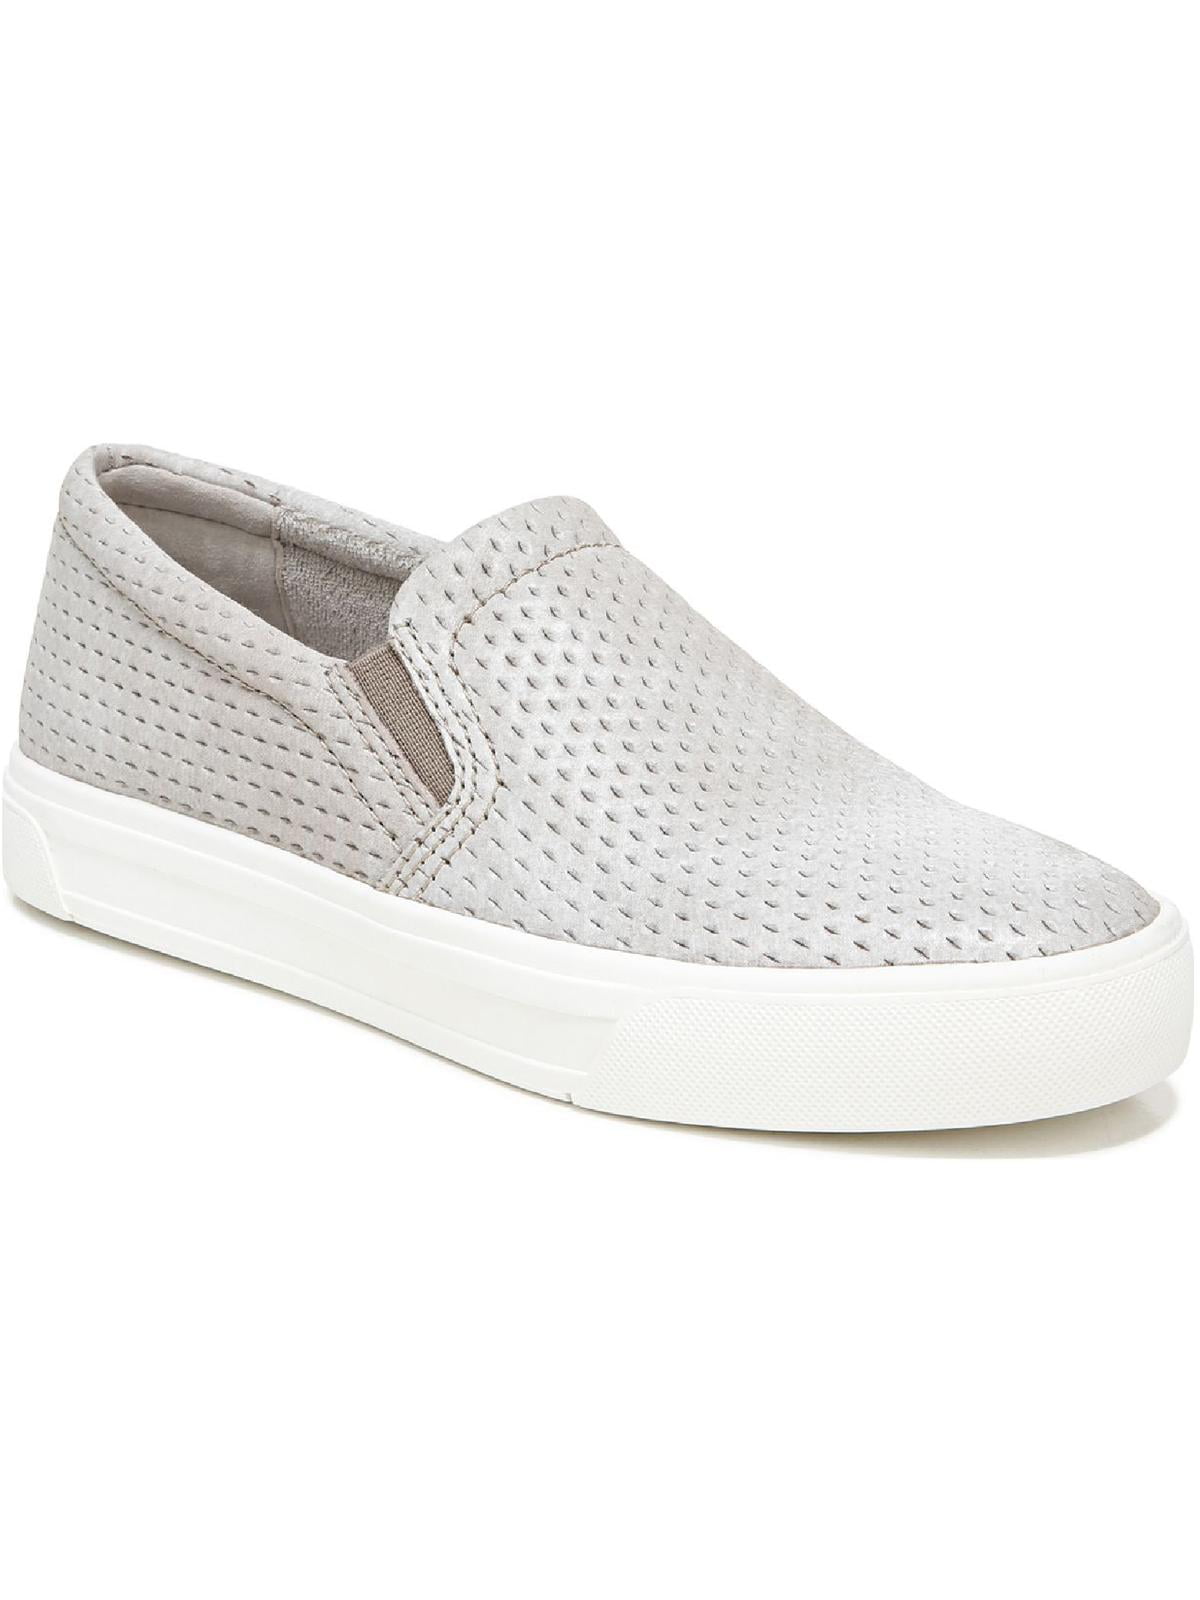 Naturalizer Womens Aileen Leather Perforated Slip-On Sneakers - Walmart.com